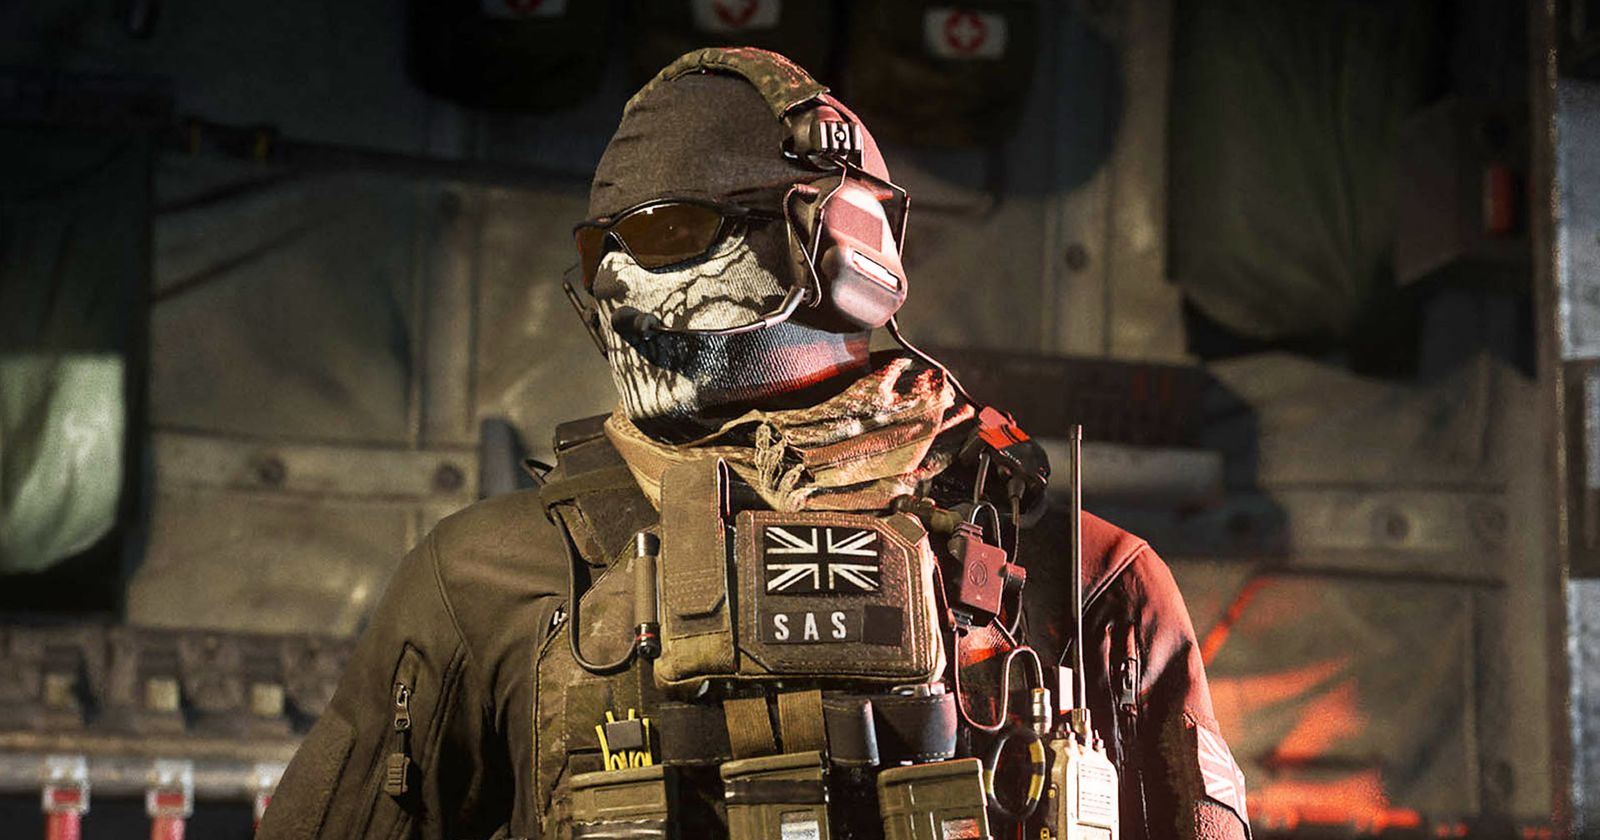 Want to know what Call of Duty: Modern Warfare 2's Ghost looks like under  the mask?